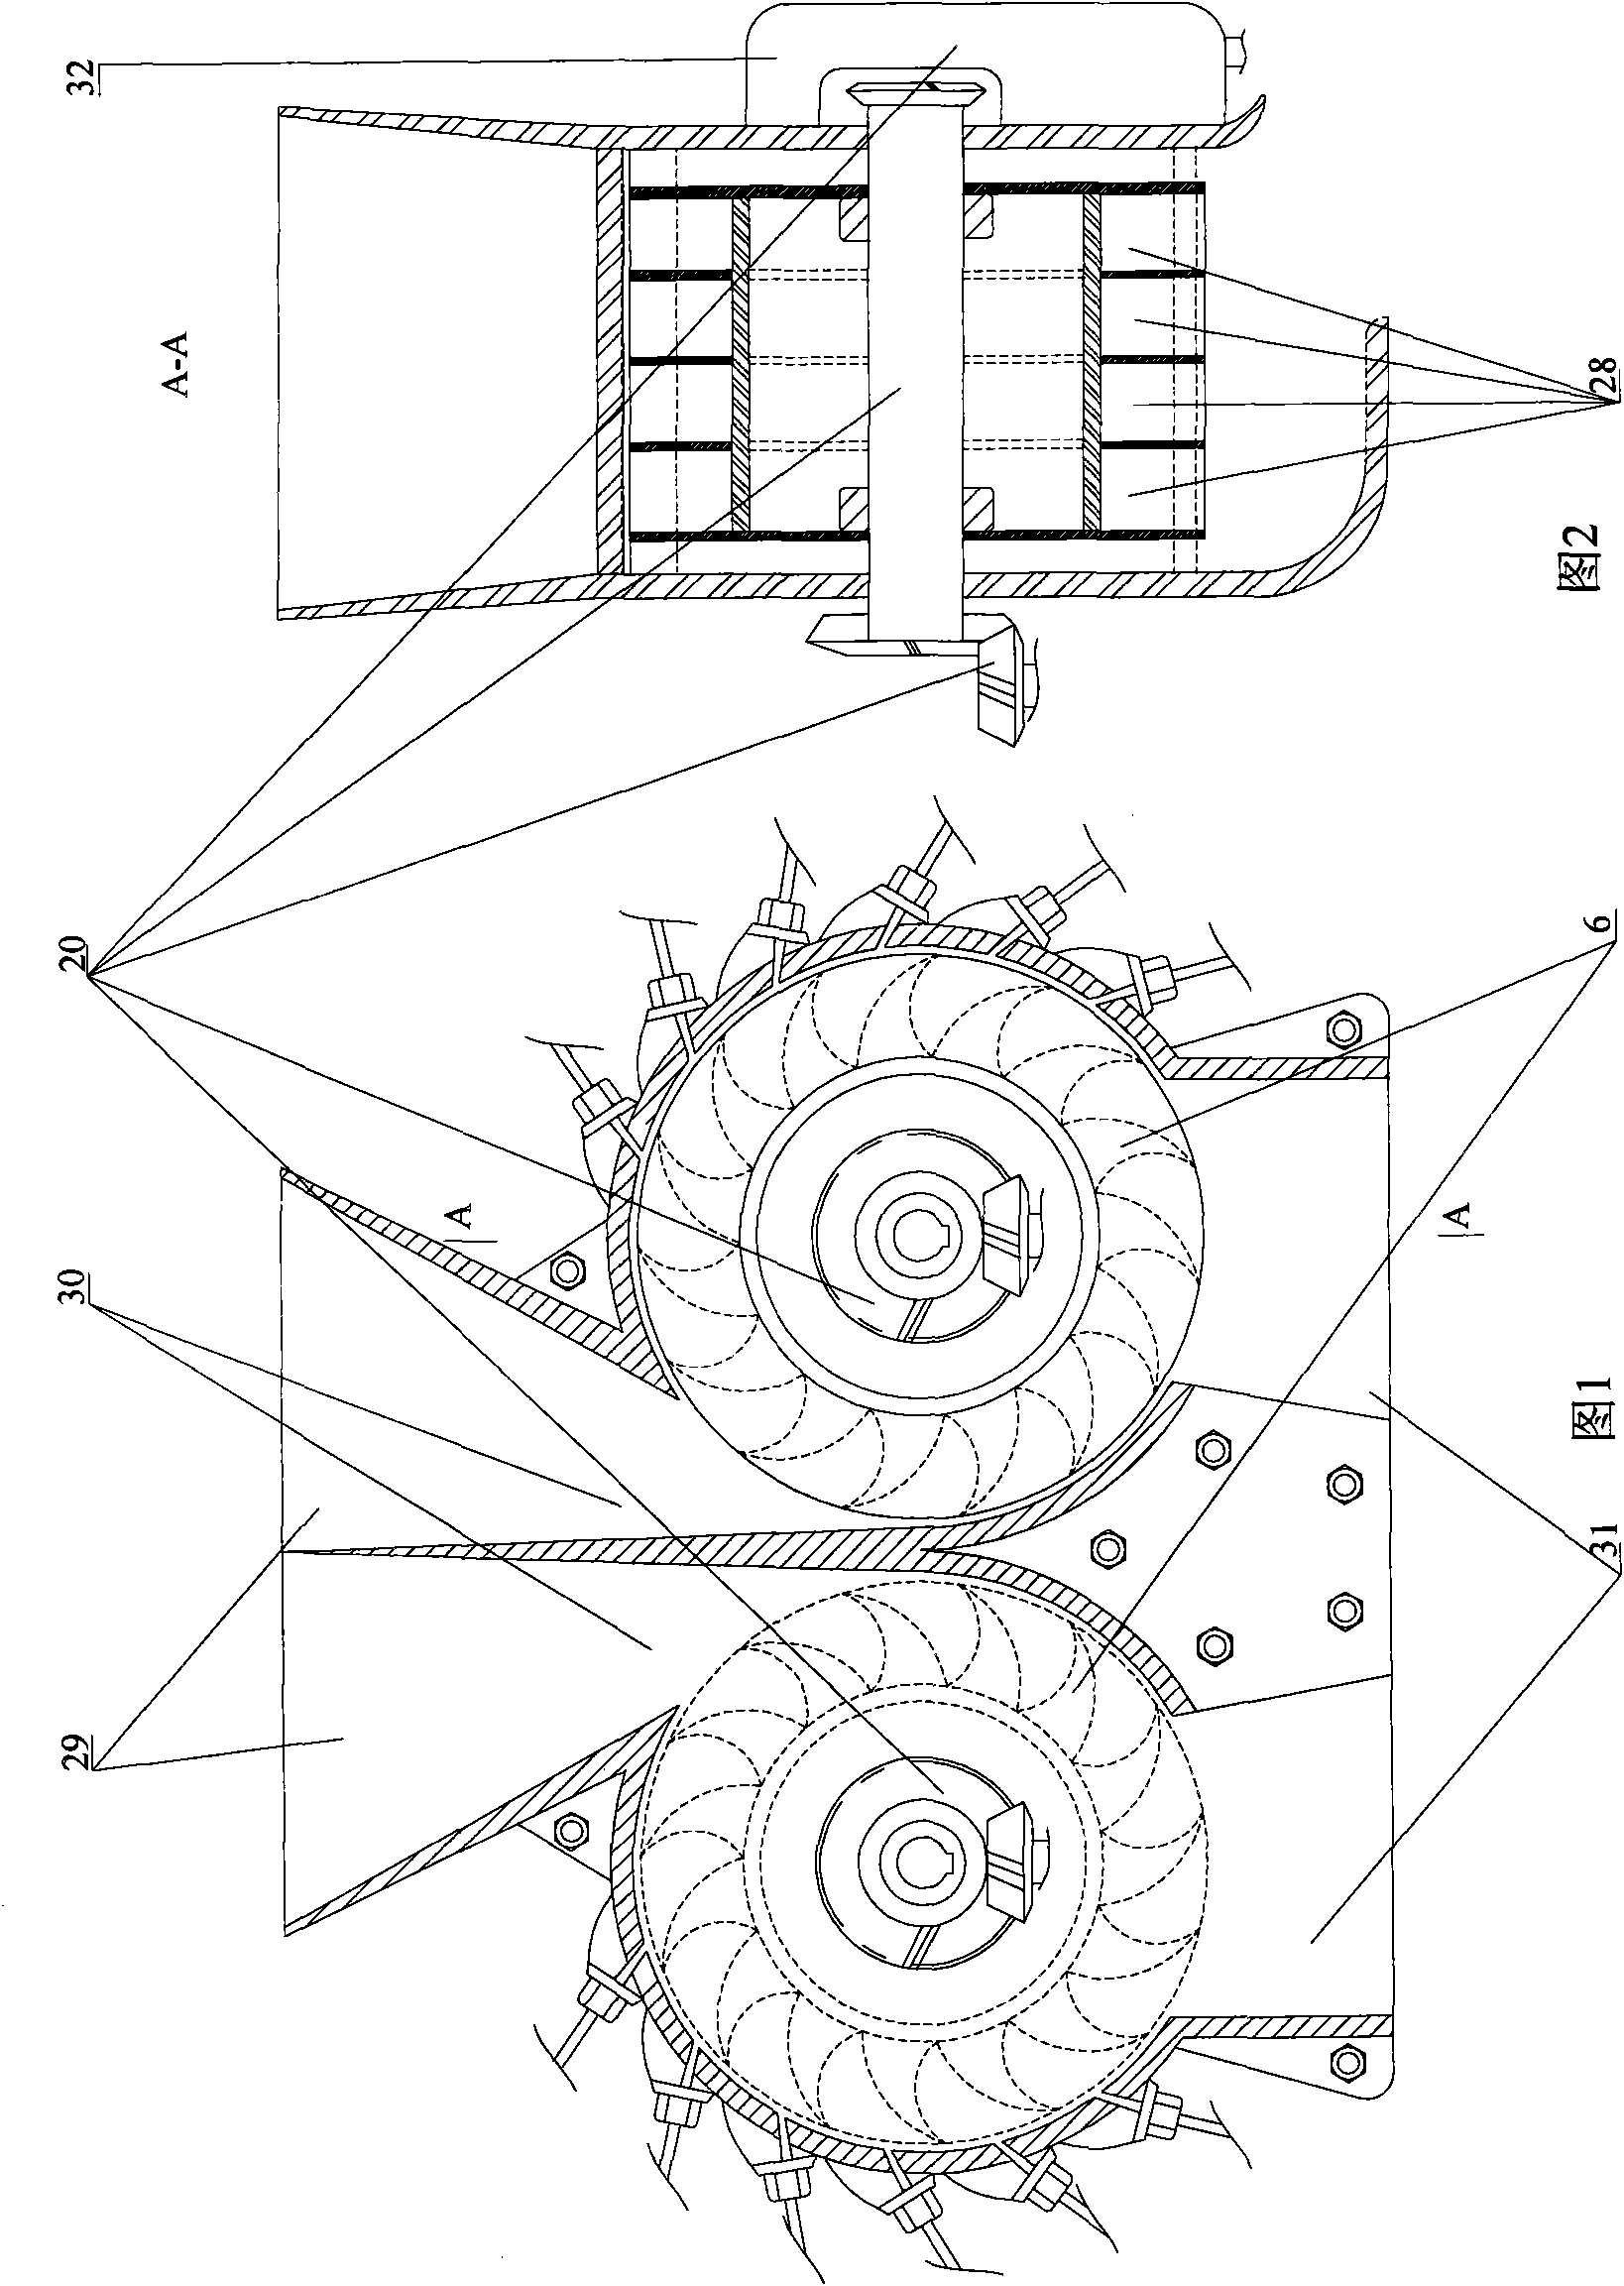 Application of wind air engine and automobile